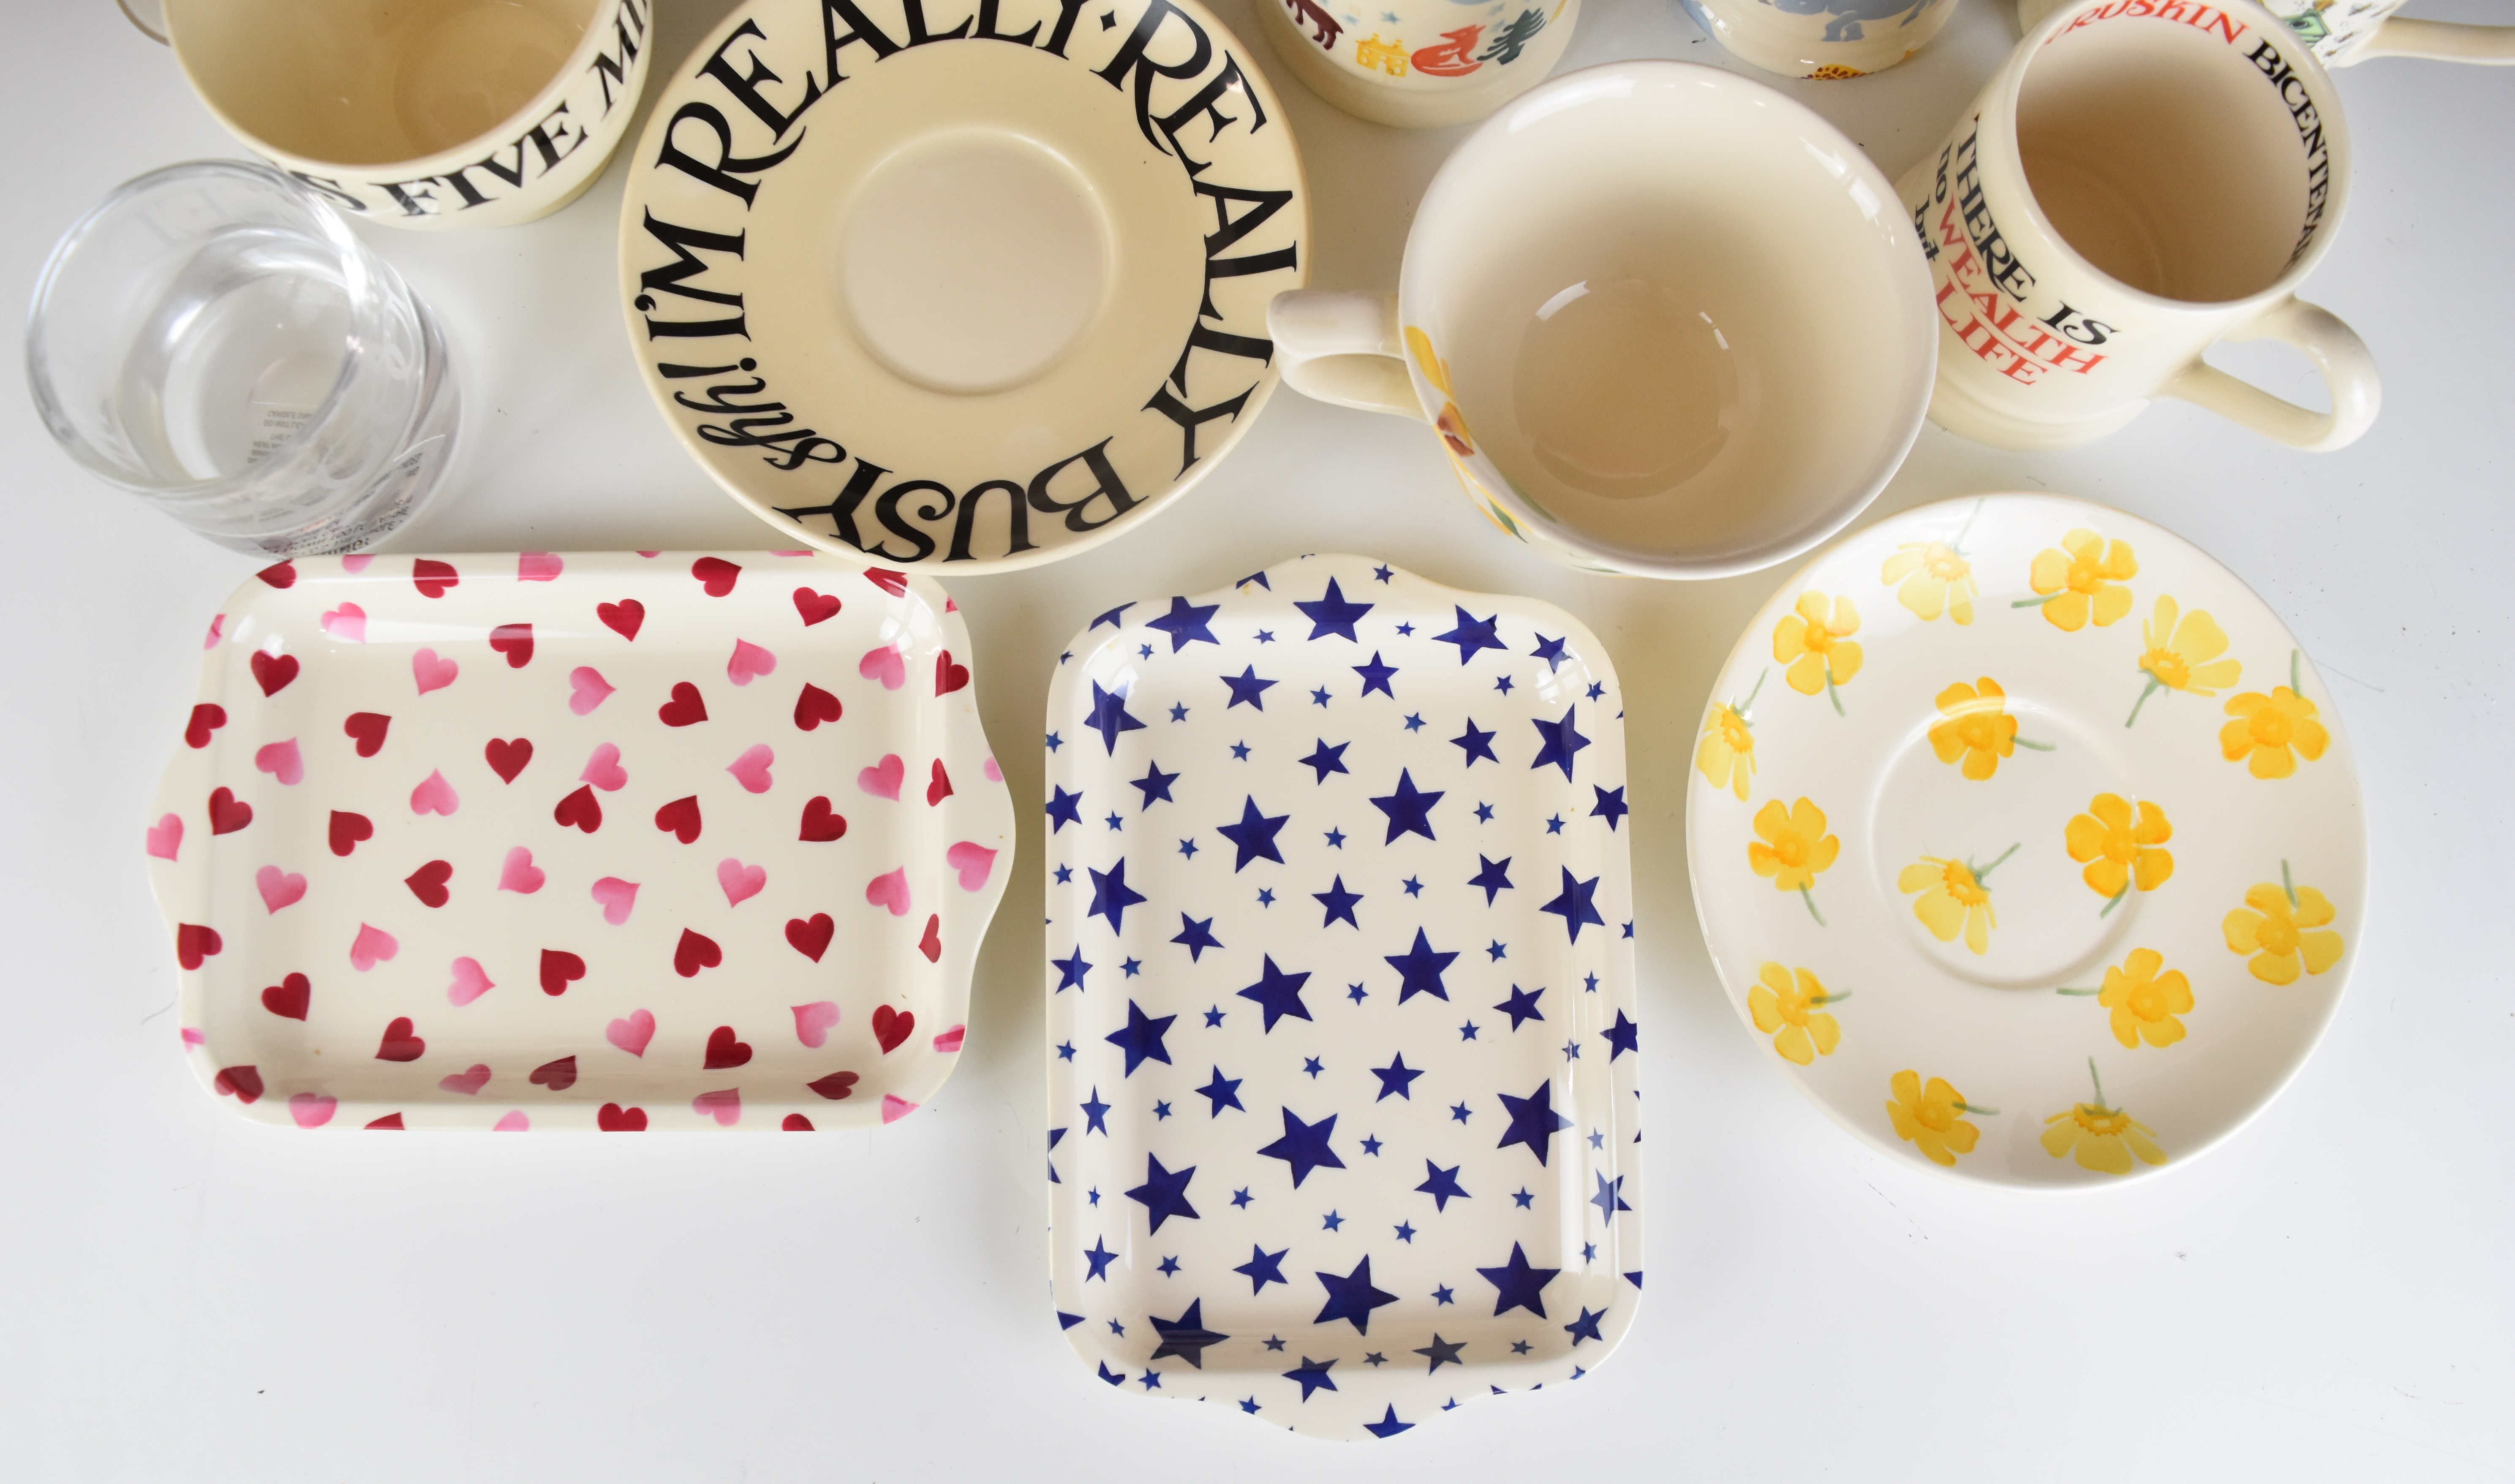 Emma Bridgewater ceramics including a tazza with pansy decoration, mugs, cups and saucers, glasses - Image 11 of 18